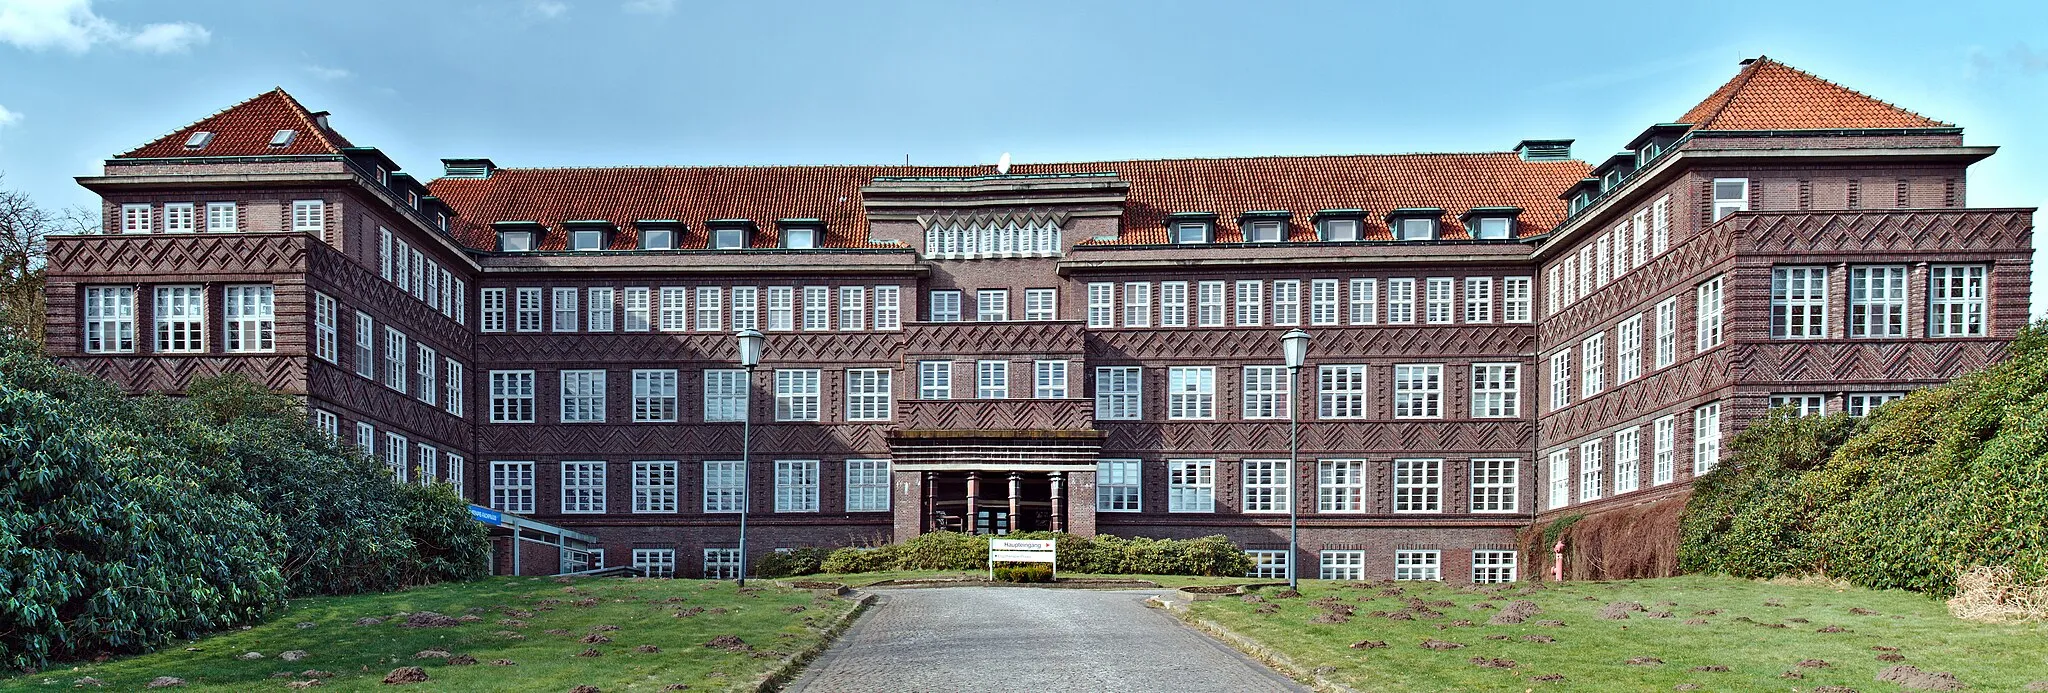 Photo showing: The main building of the "Josef-Hospital" hospital in Delmenhorst, Lower Saxony, Germany, seen from the Wildeshauser Straße street.